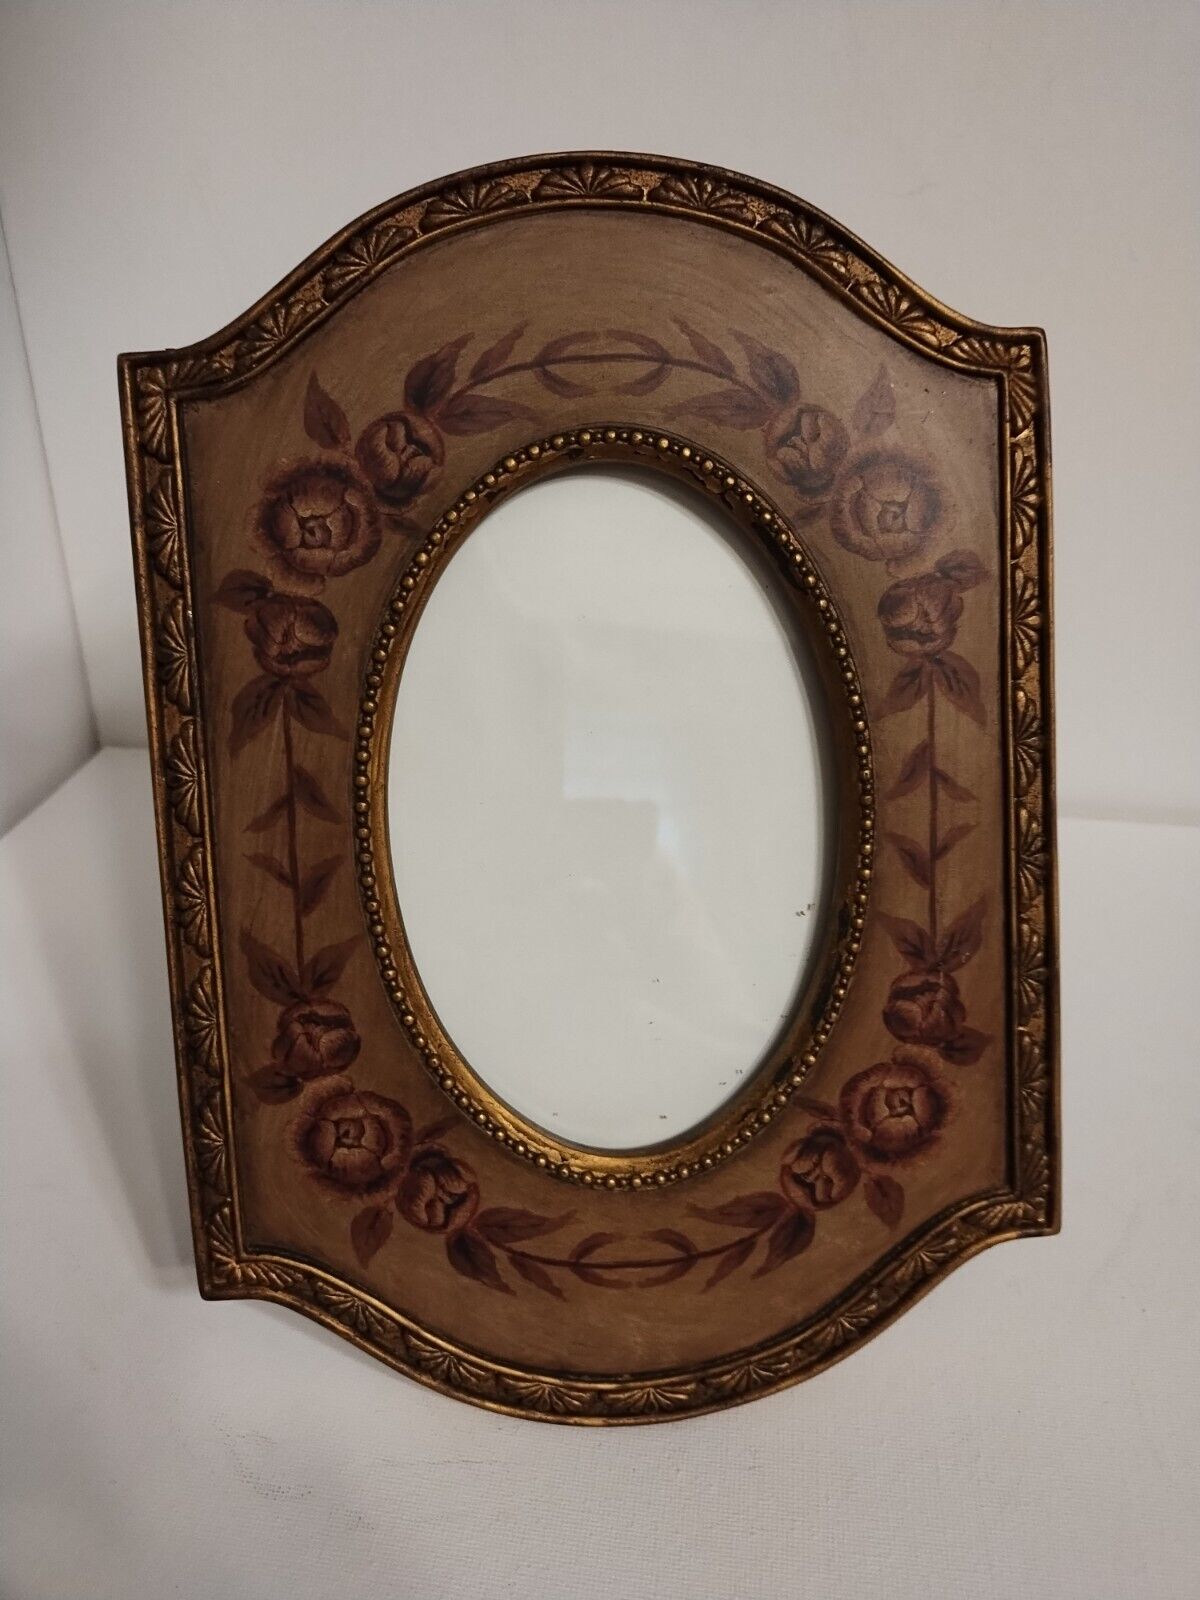 Burgandy/Gold Floral & Leaf Detailed Picture Frame.  Holds 4x6 Oval Picture